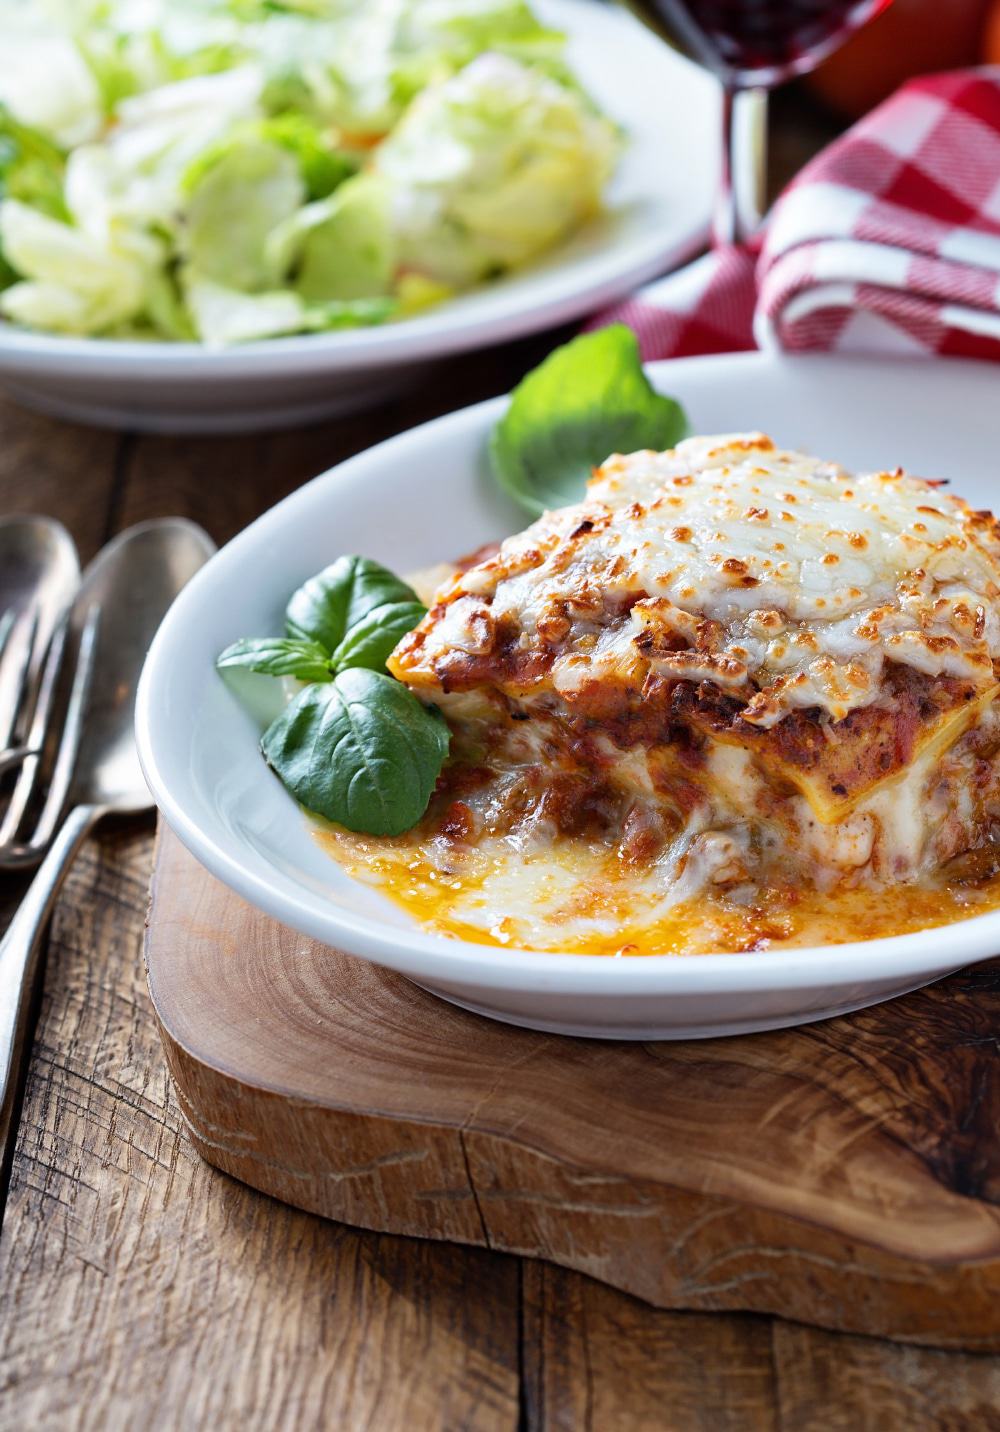 Lasagne Has To Be The King of Soul Food | Cooking Clue